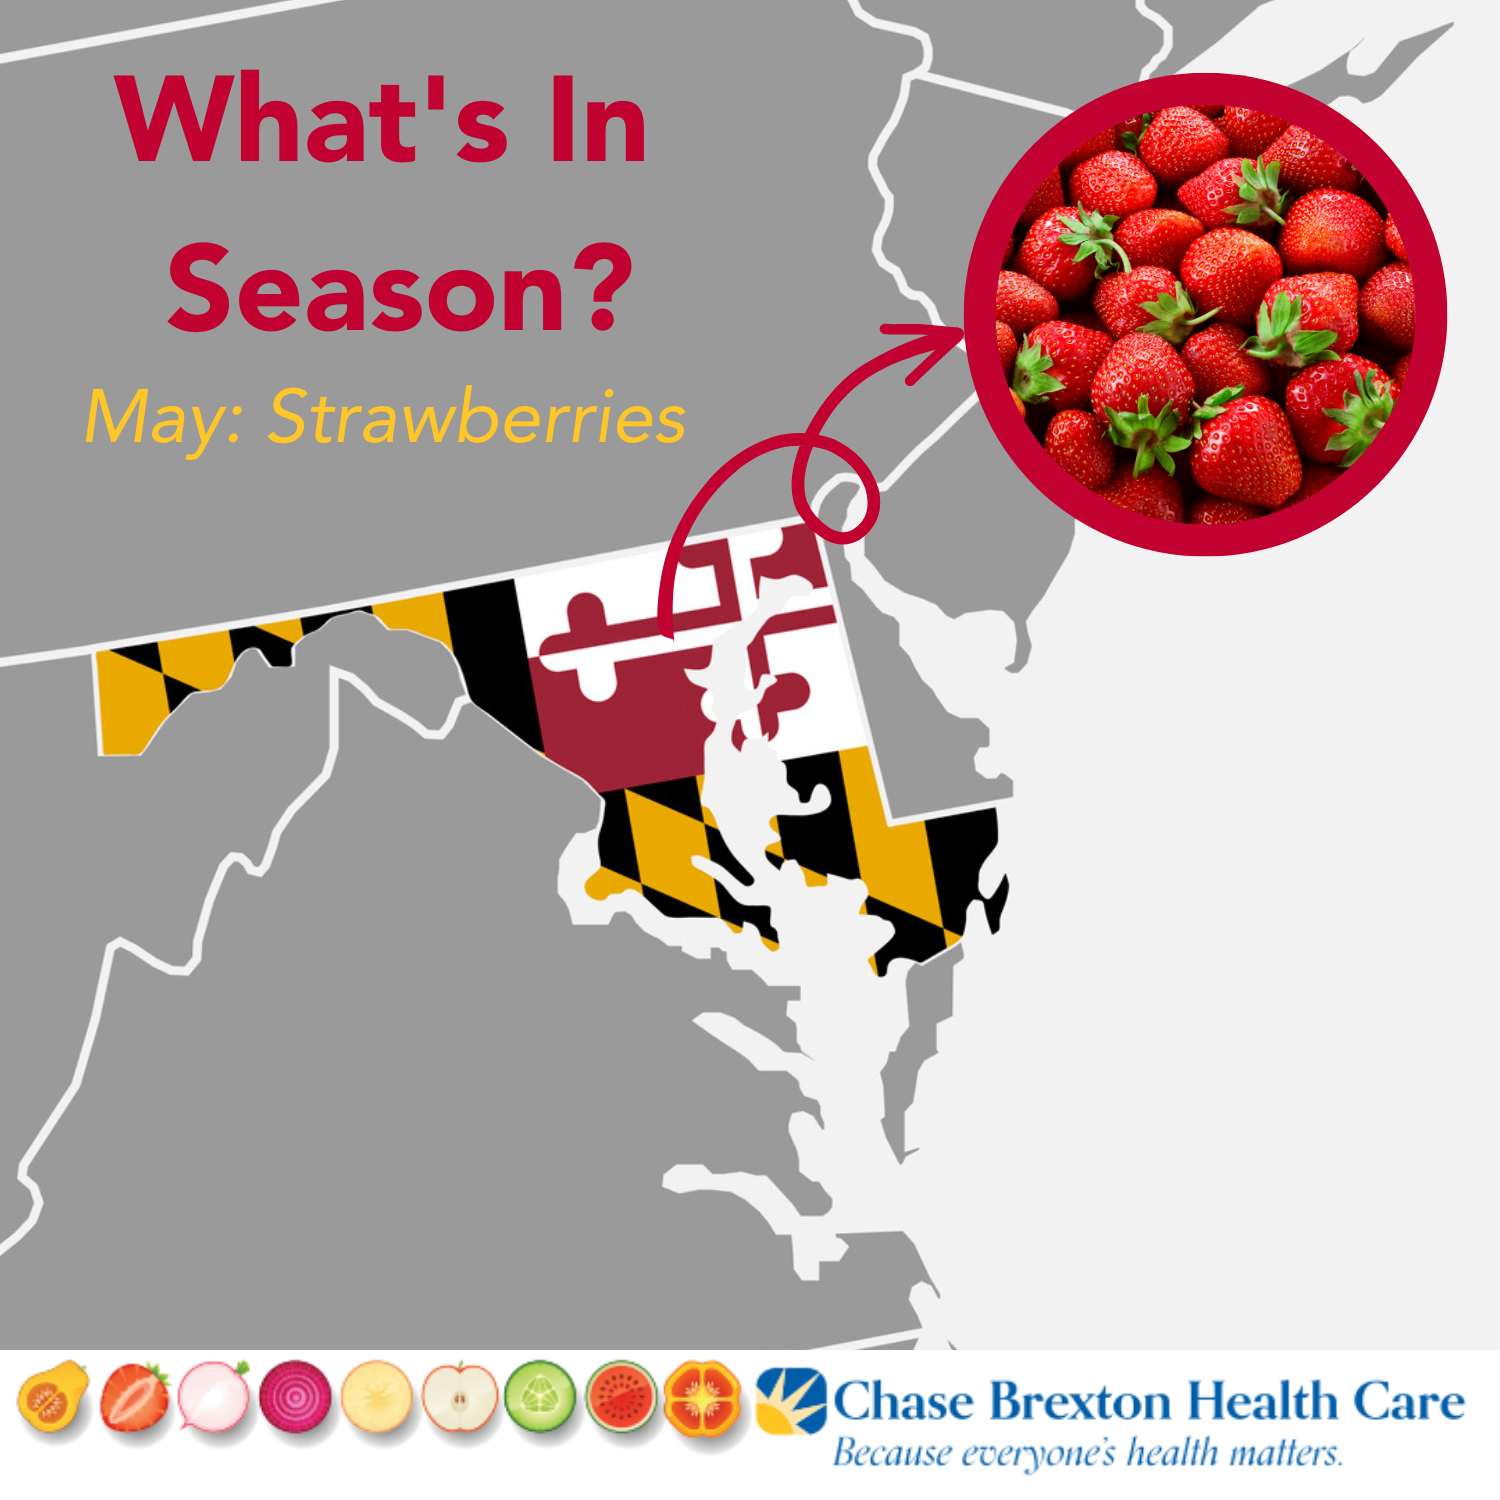 What's In Season? May: Strawberries. Maryland map pointing to an image of fresh strawberries